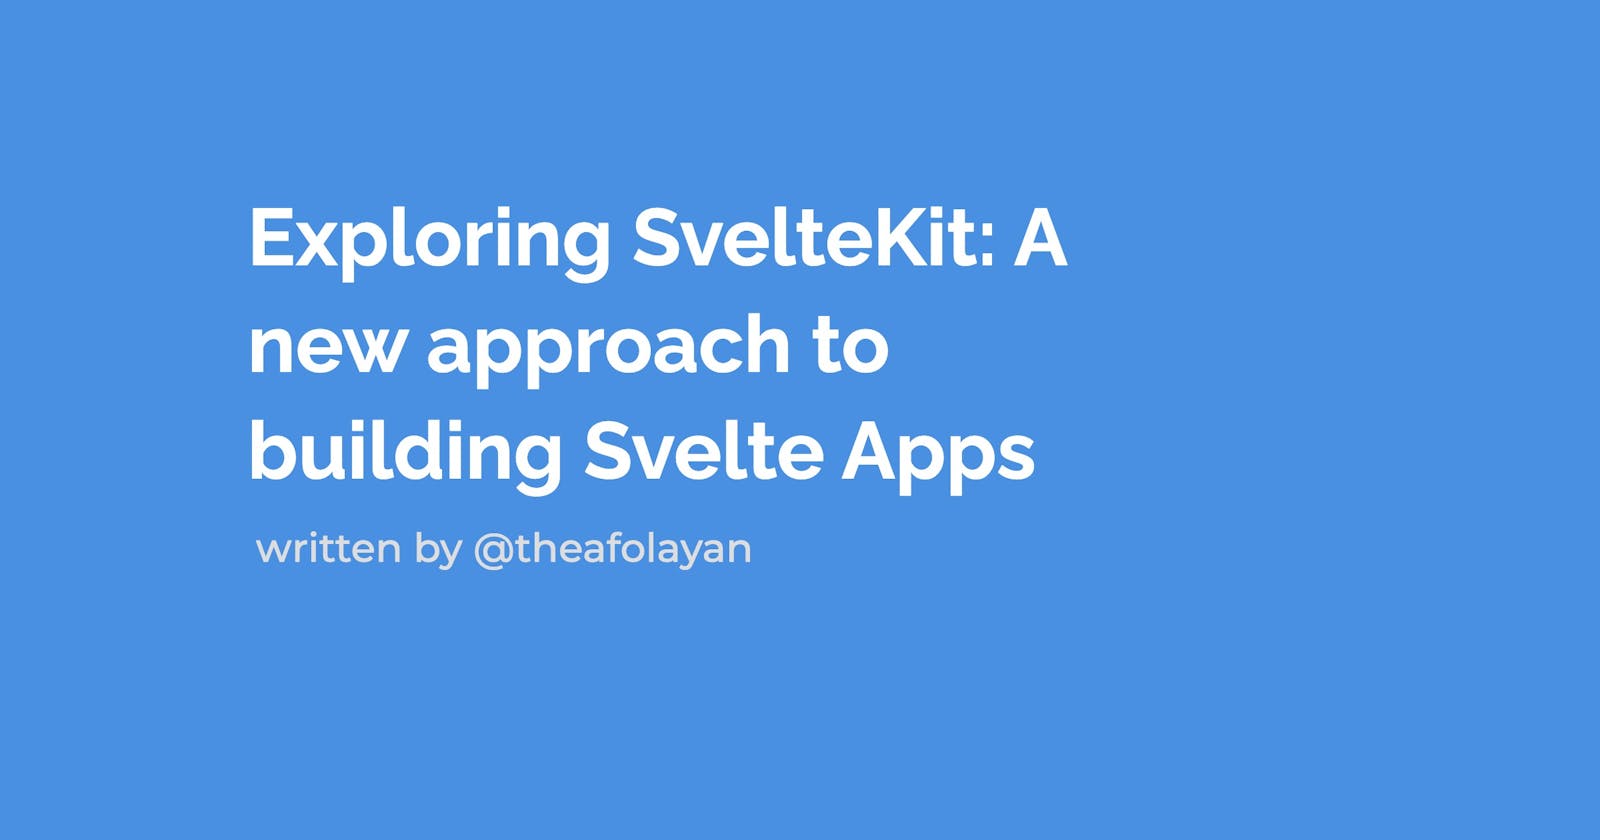 Exploring SvelteKit: A new approach to building Svelte Apps